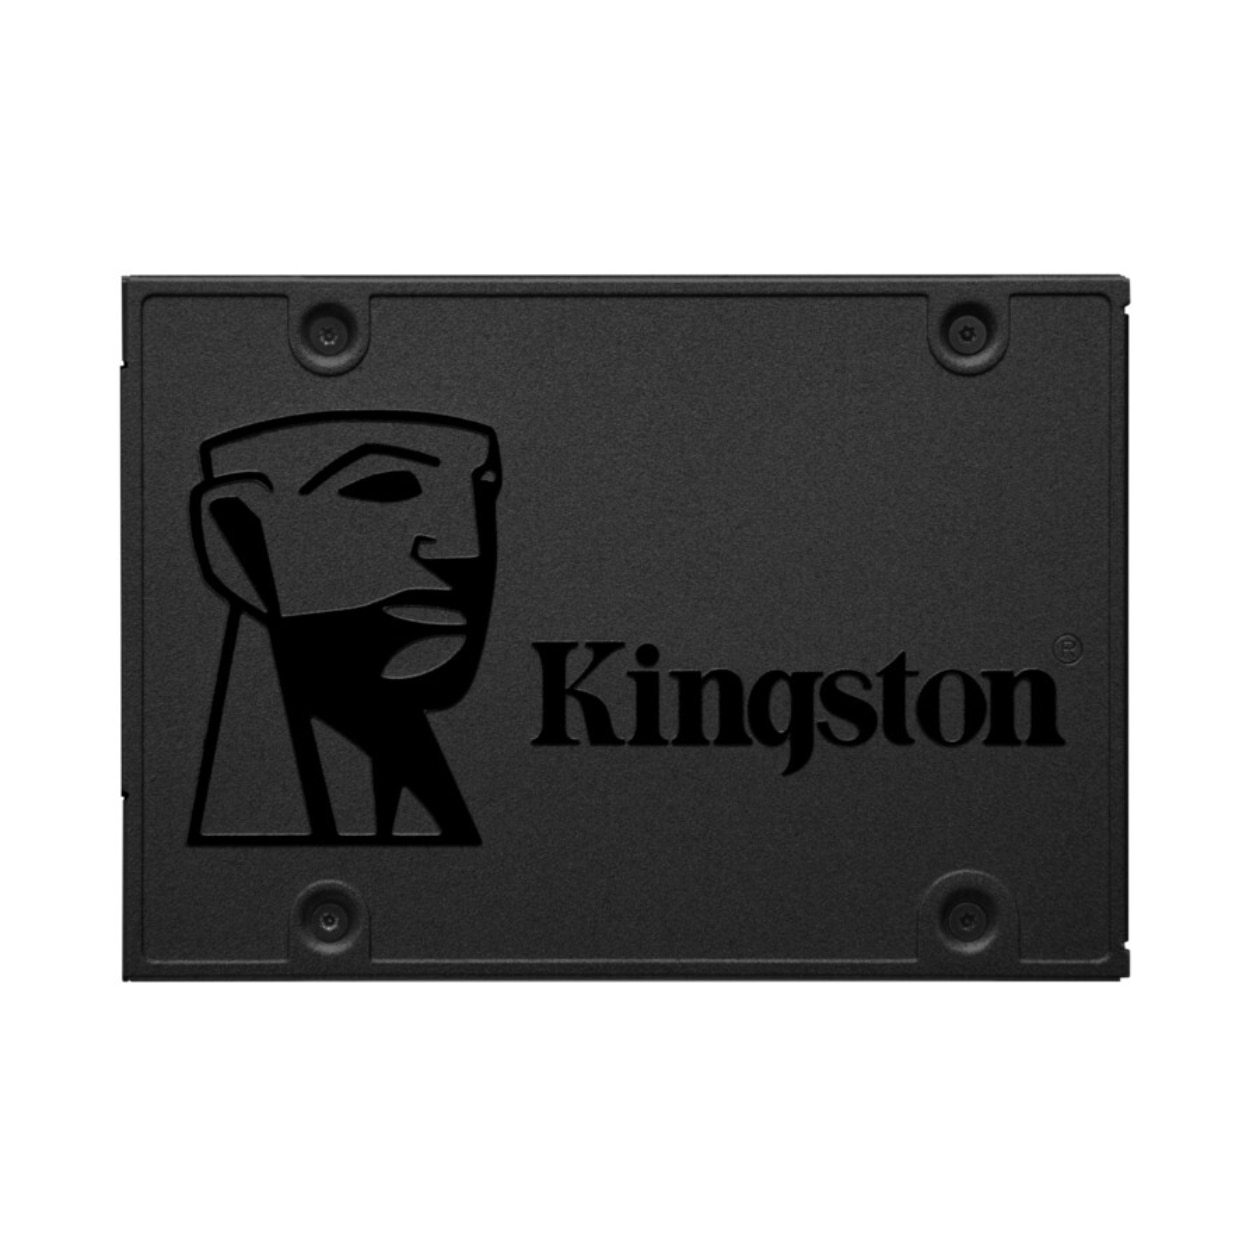 Kingston Q500 480 GB Rugged Solid State Drive